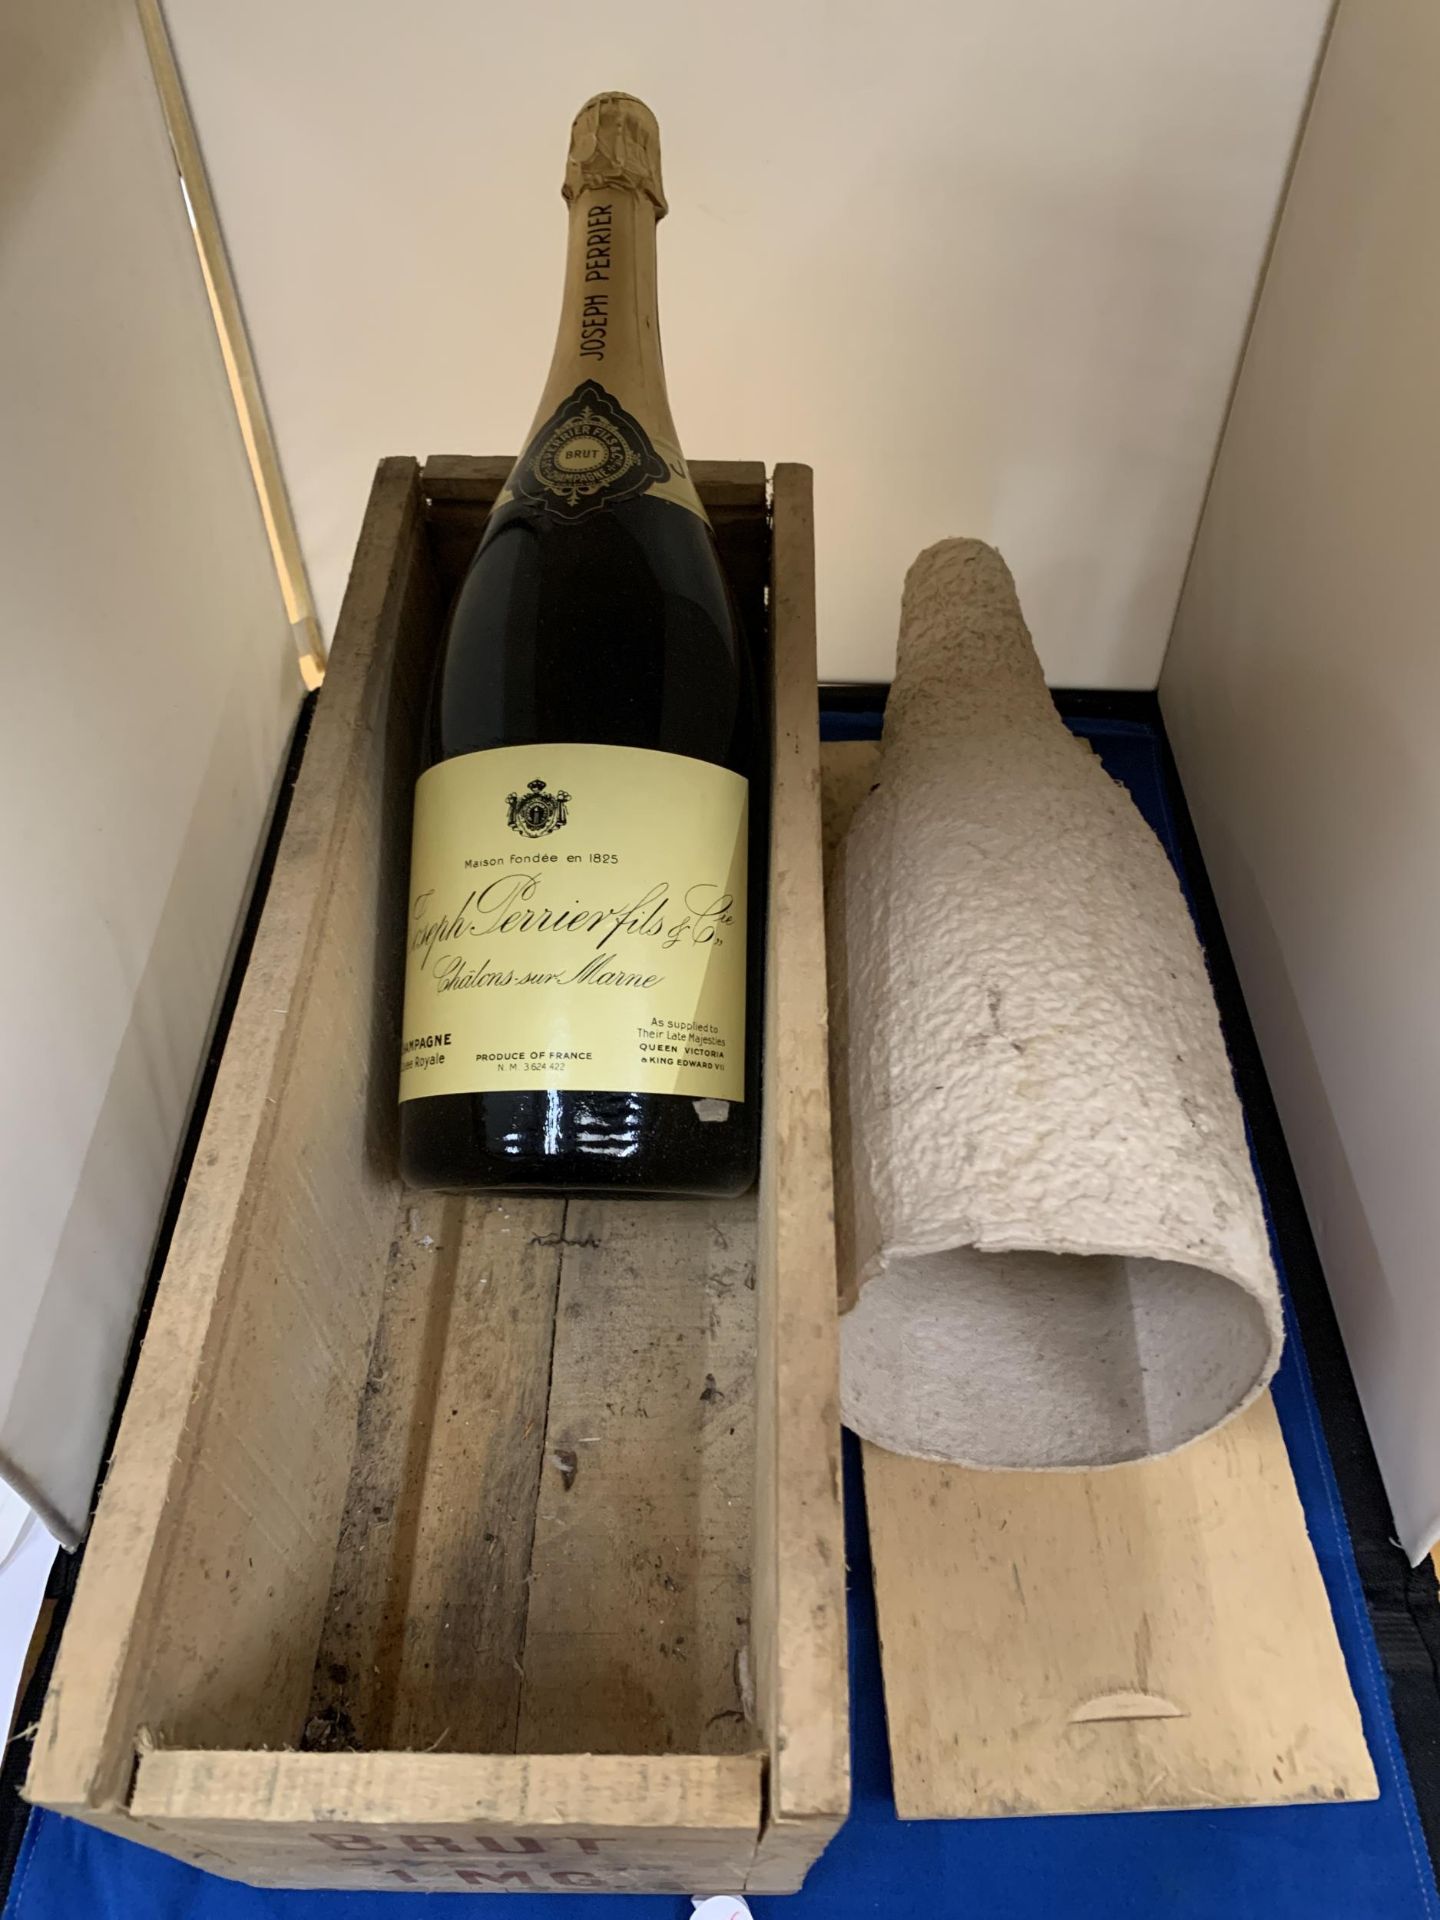 A MAGNUM OF JOSEPH PERRIERFILS & CO CHALONS SUR MAINE CHAMPAGNE WITH BOTTLE PROTECTOR IN AN ORIGINAL